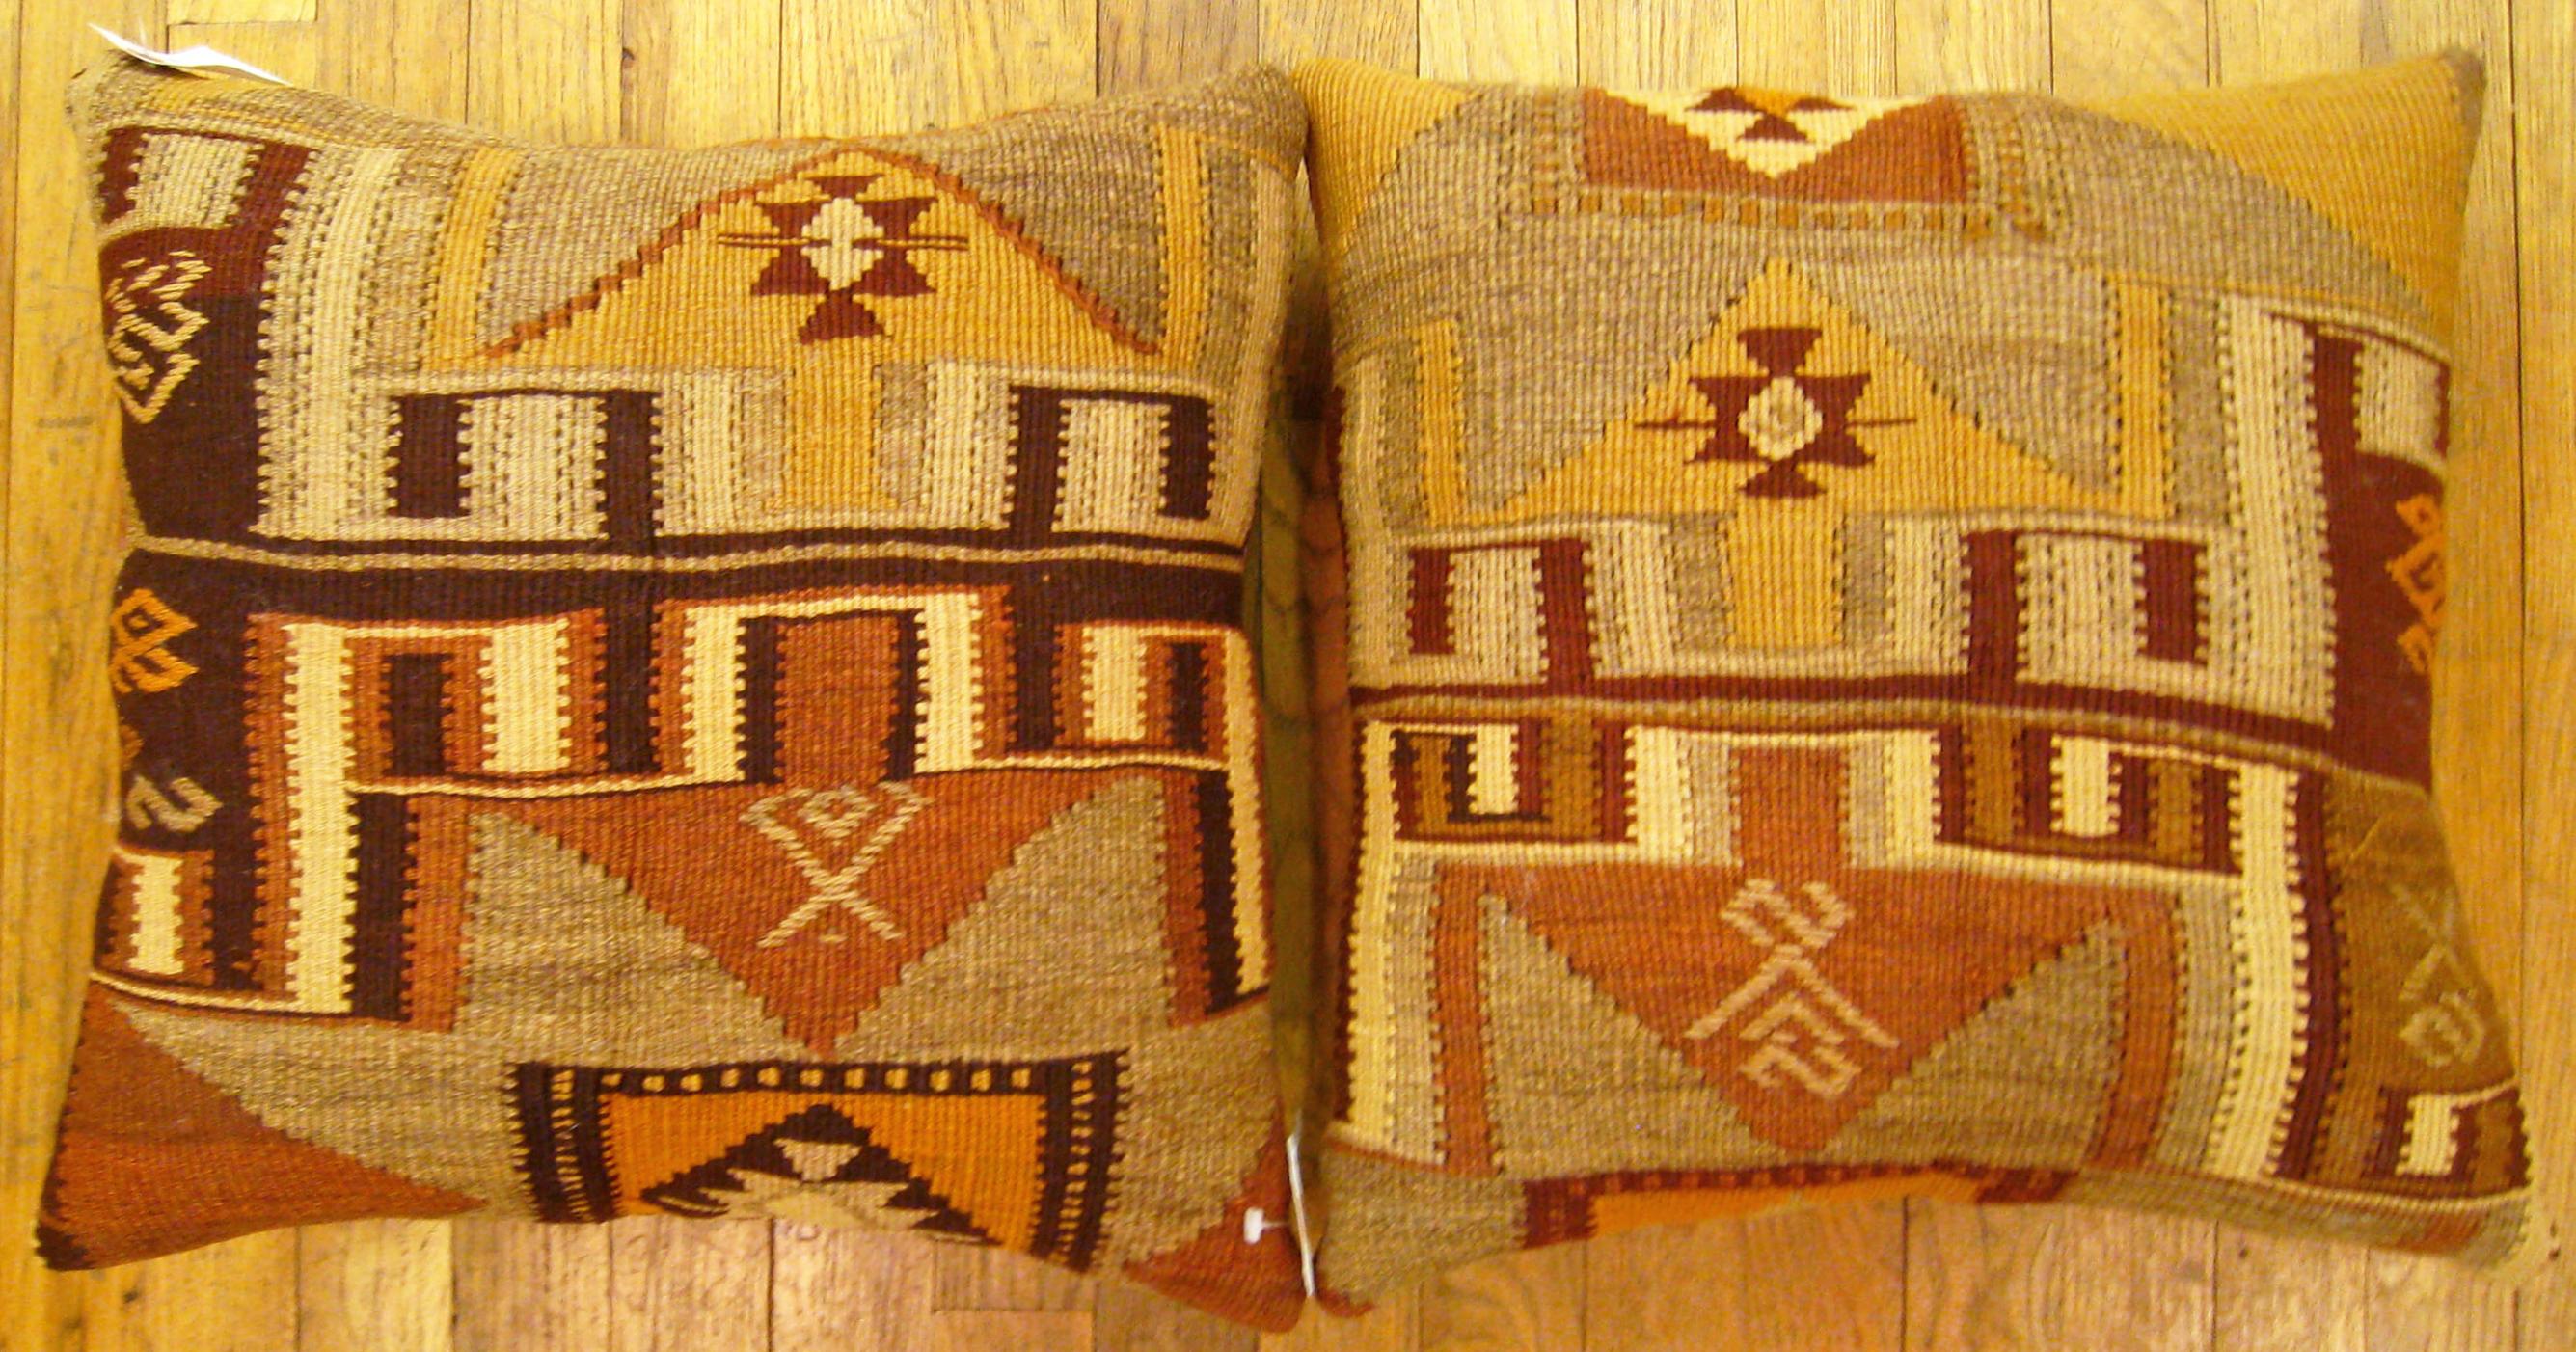 A pair of vintage Turkish Kilim rug pillows; size 18” X 17” each.

A vintage decorative pillows with geometric abstracts allover a brown central field, size 18” X 17” each. This lovely decorative pillow features a vintage fabric of a KIilim carpet